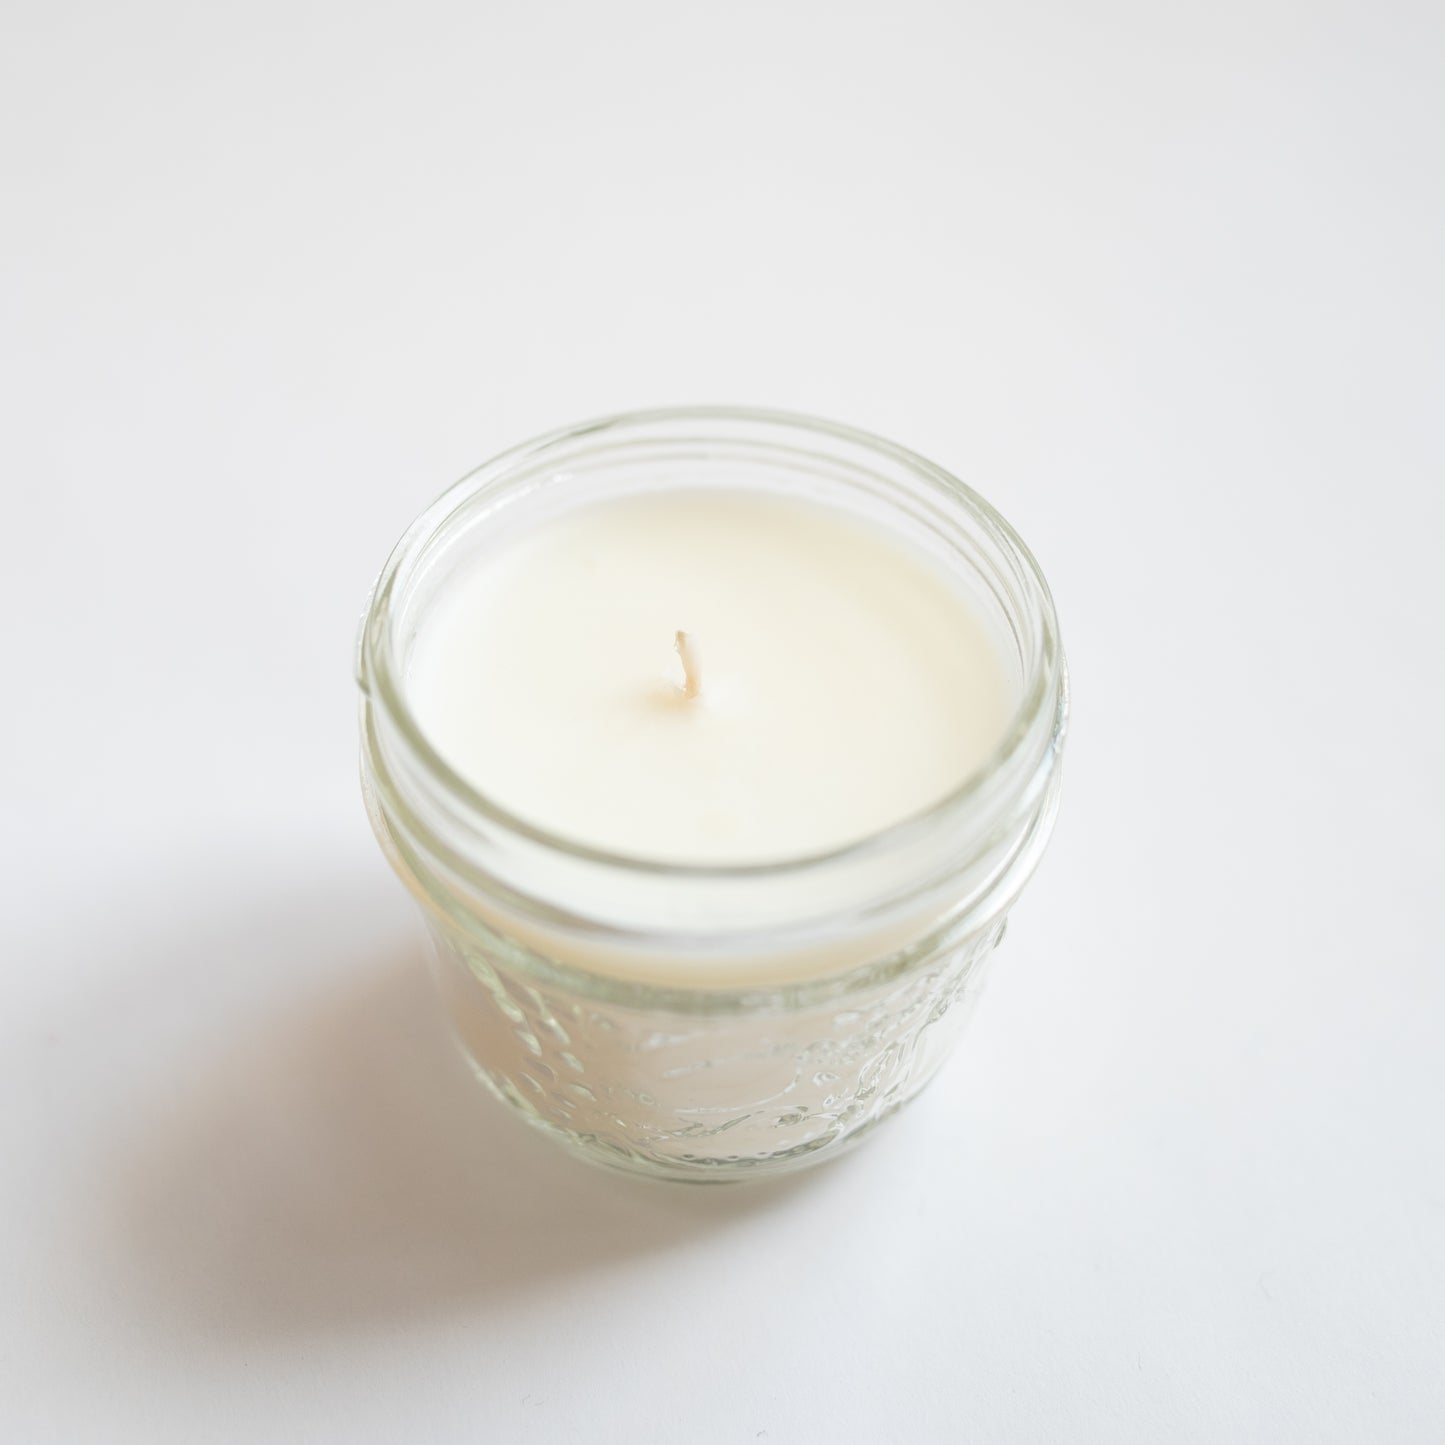 Soy and Lavender Essential Oil Candle